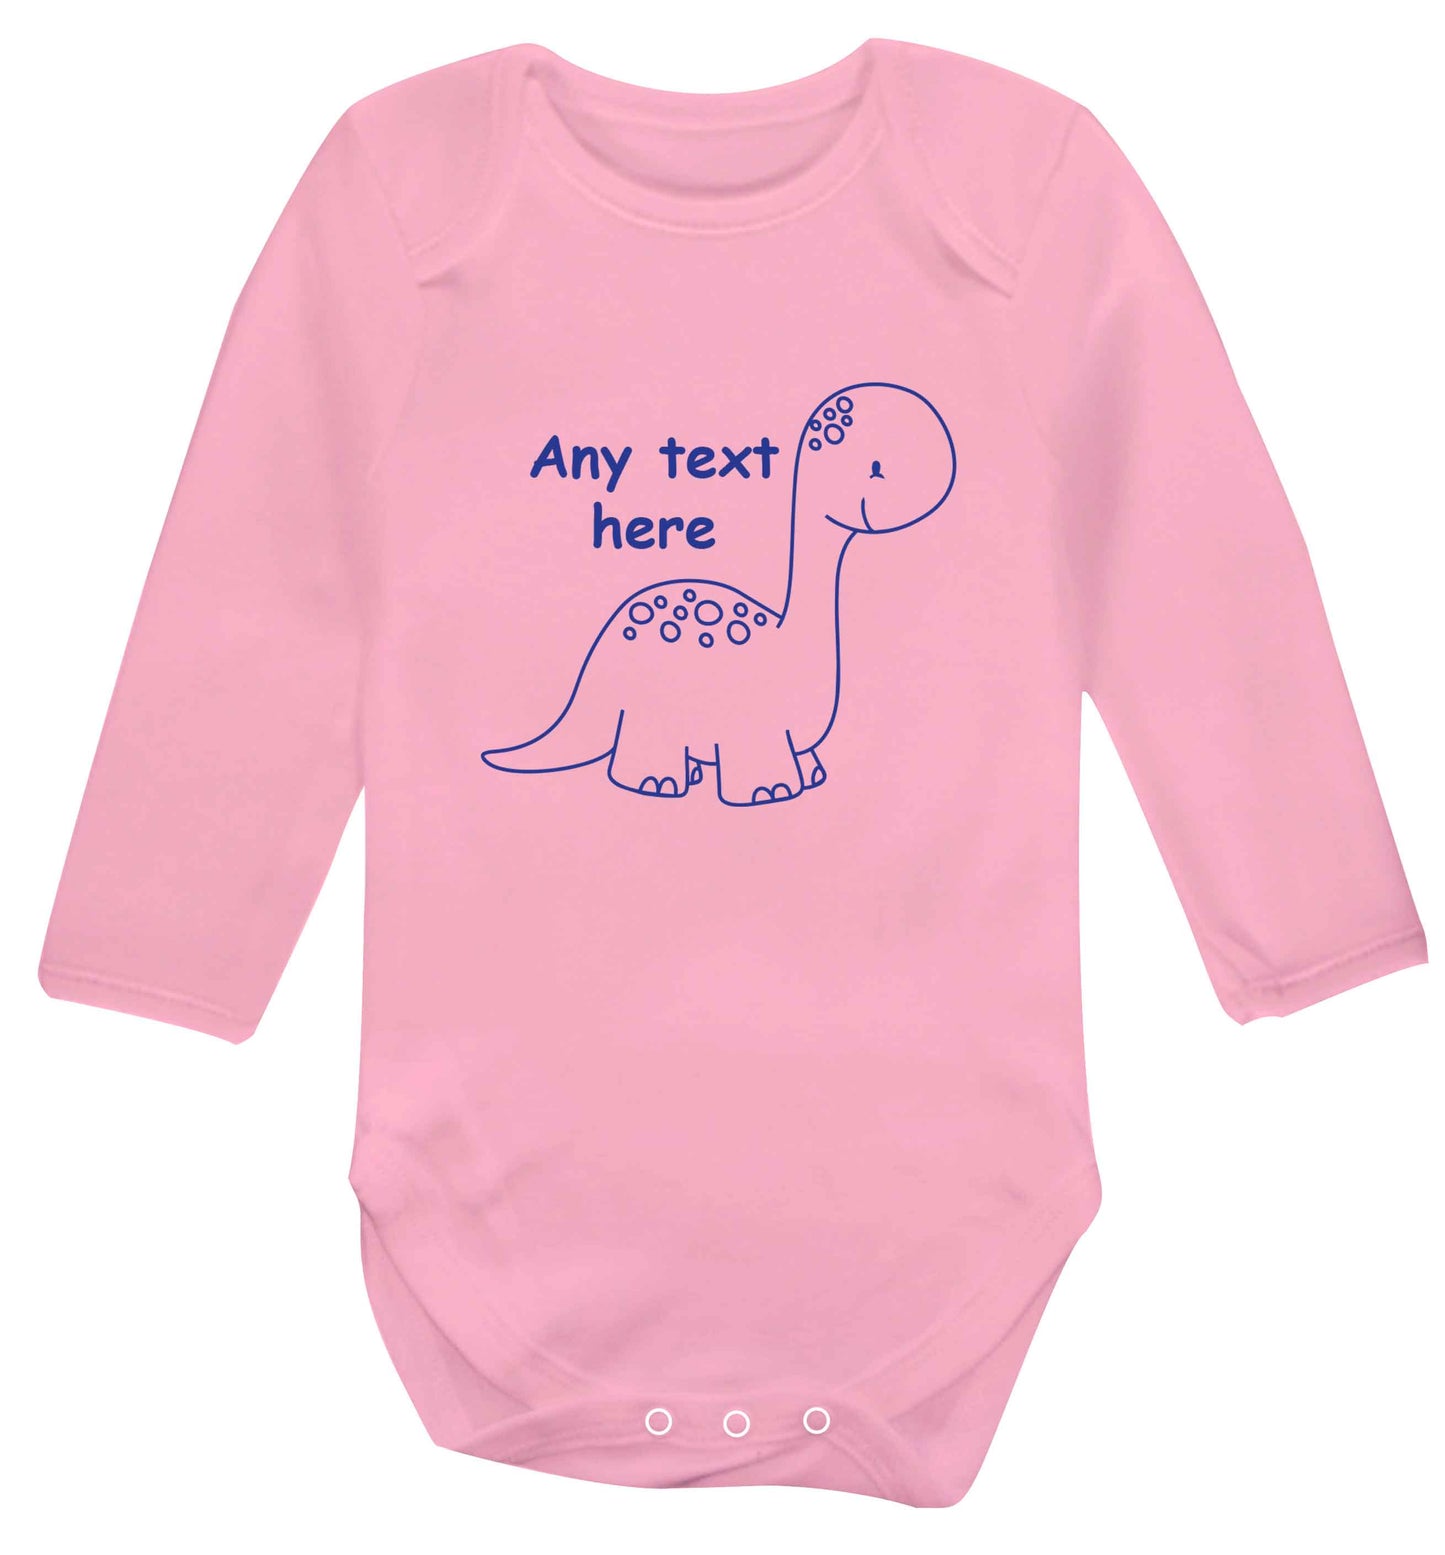 Dinosaur any text baby vest long sleeved pale pink 6-12 months